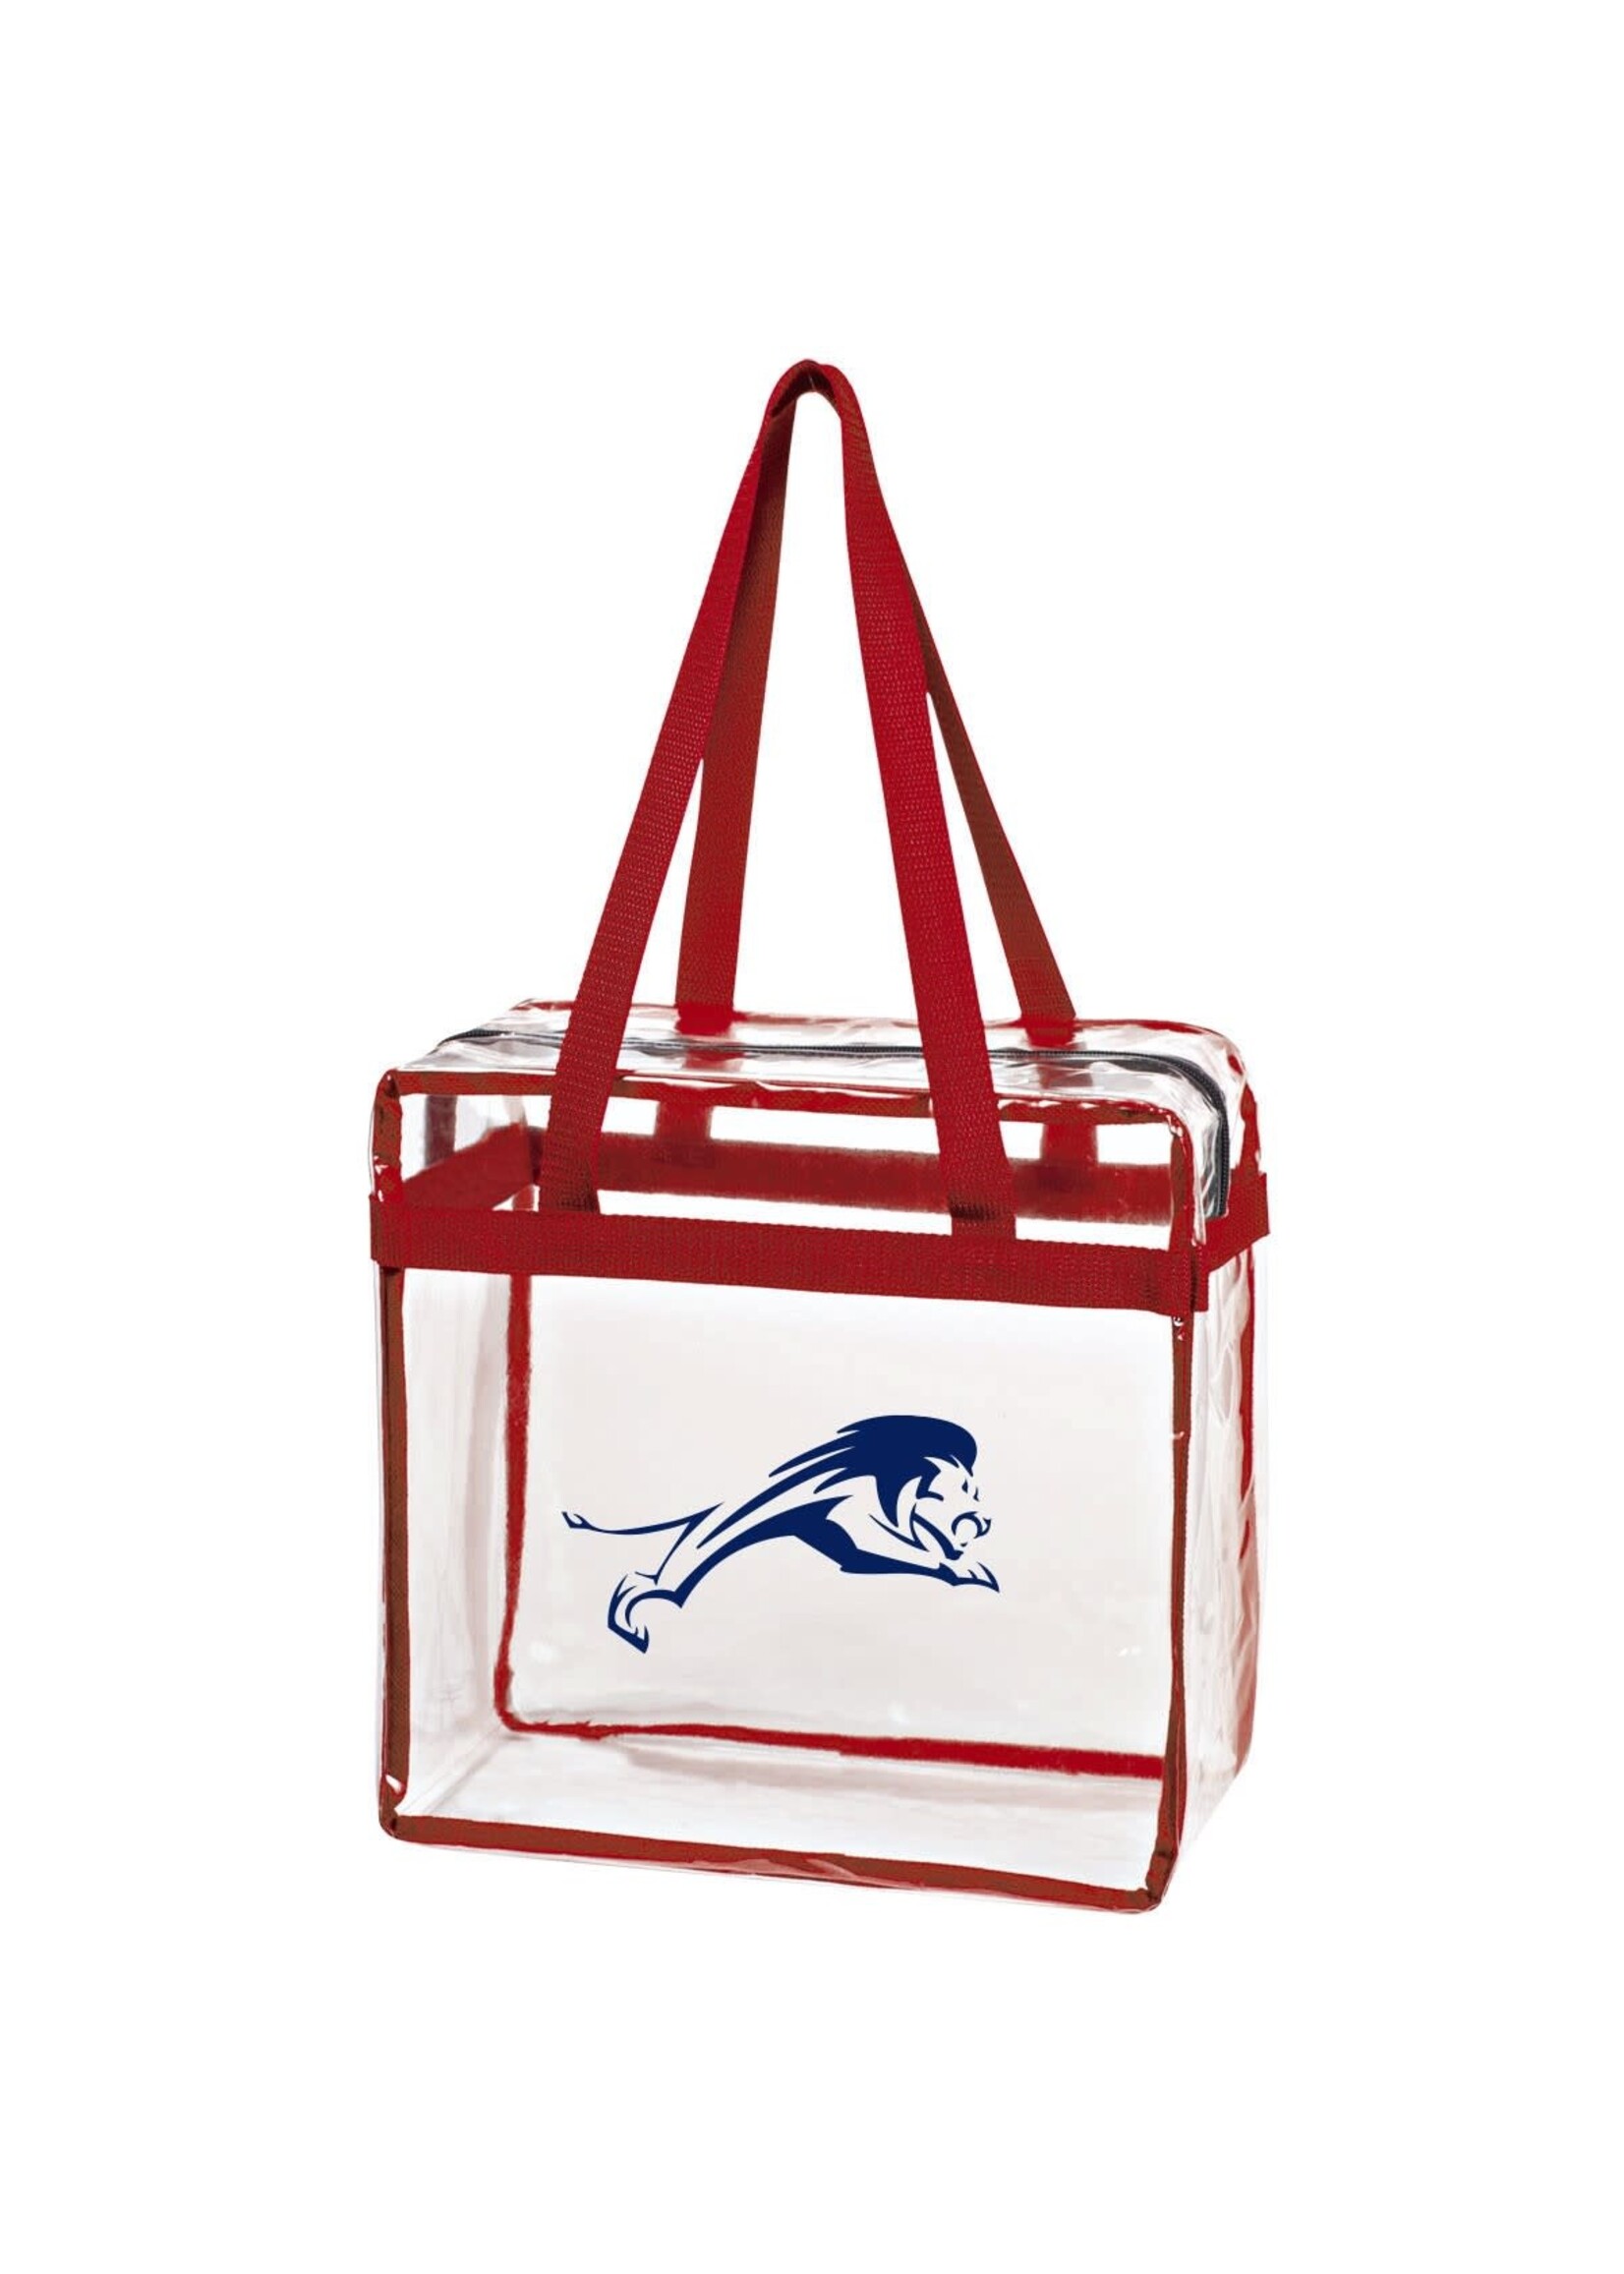 Stadium-Approved Clear Bag